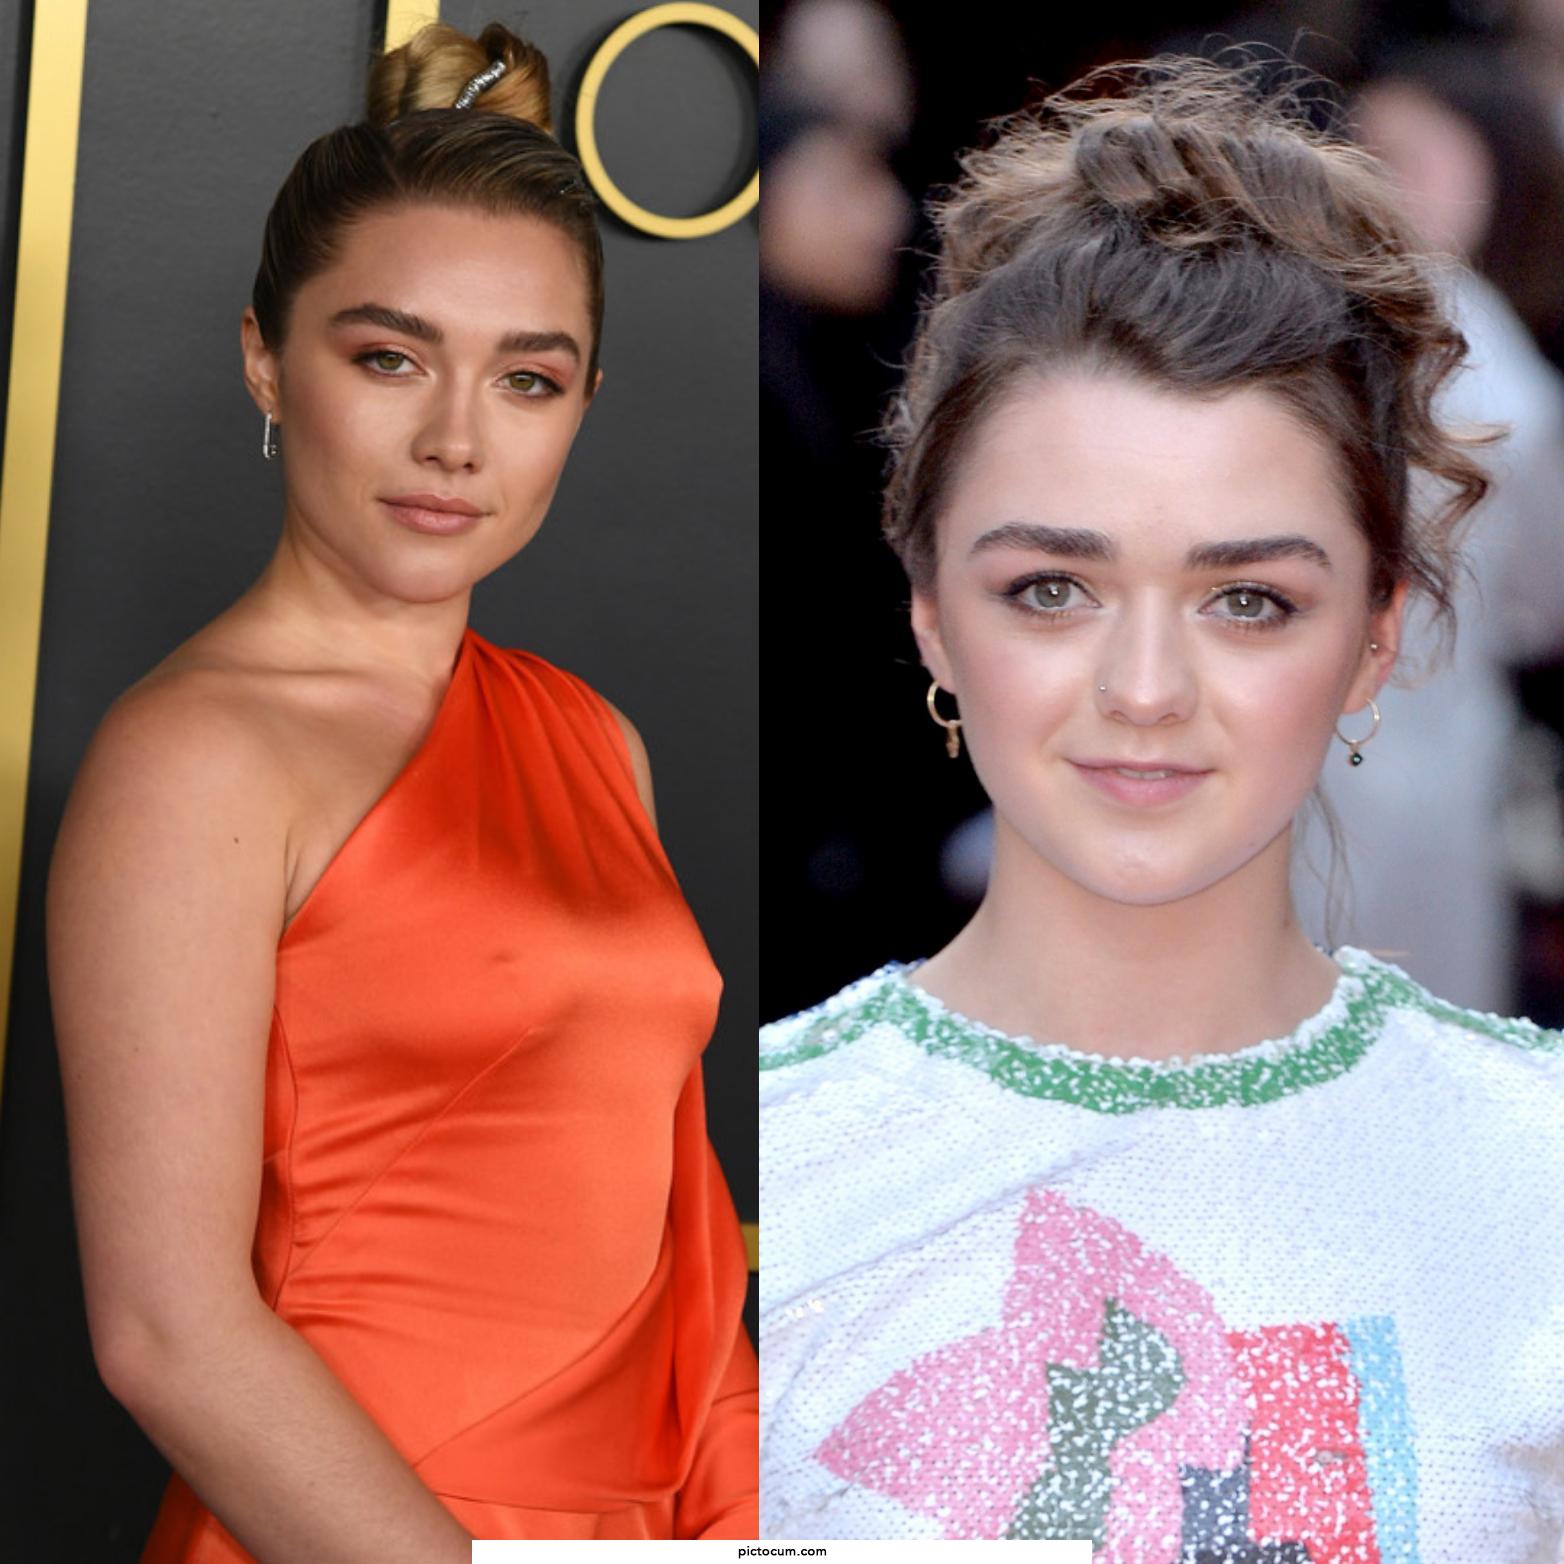 I desperately need Florence Pugh and Maisie Williams at the same time so badly